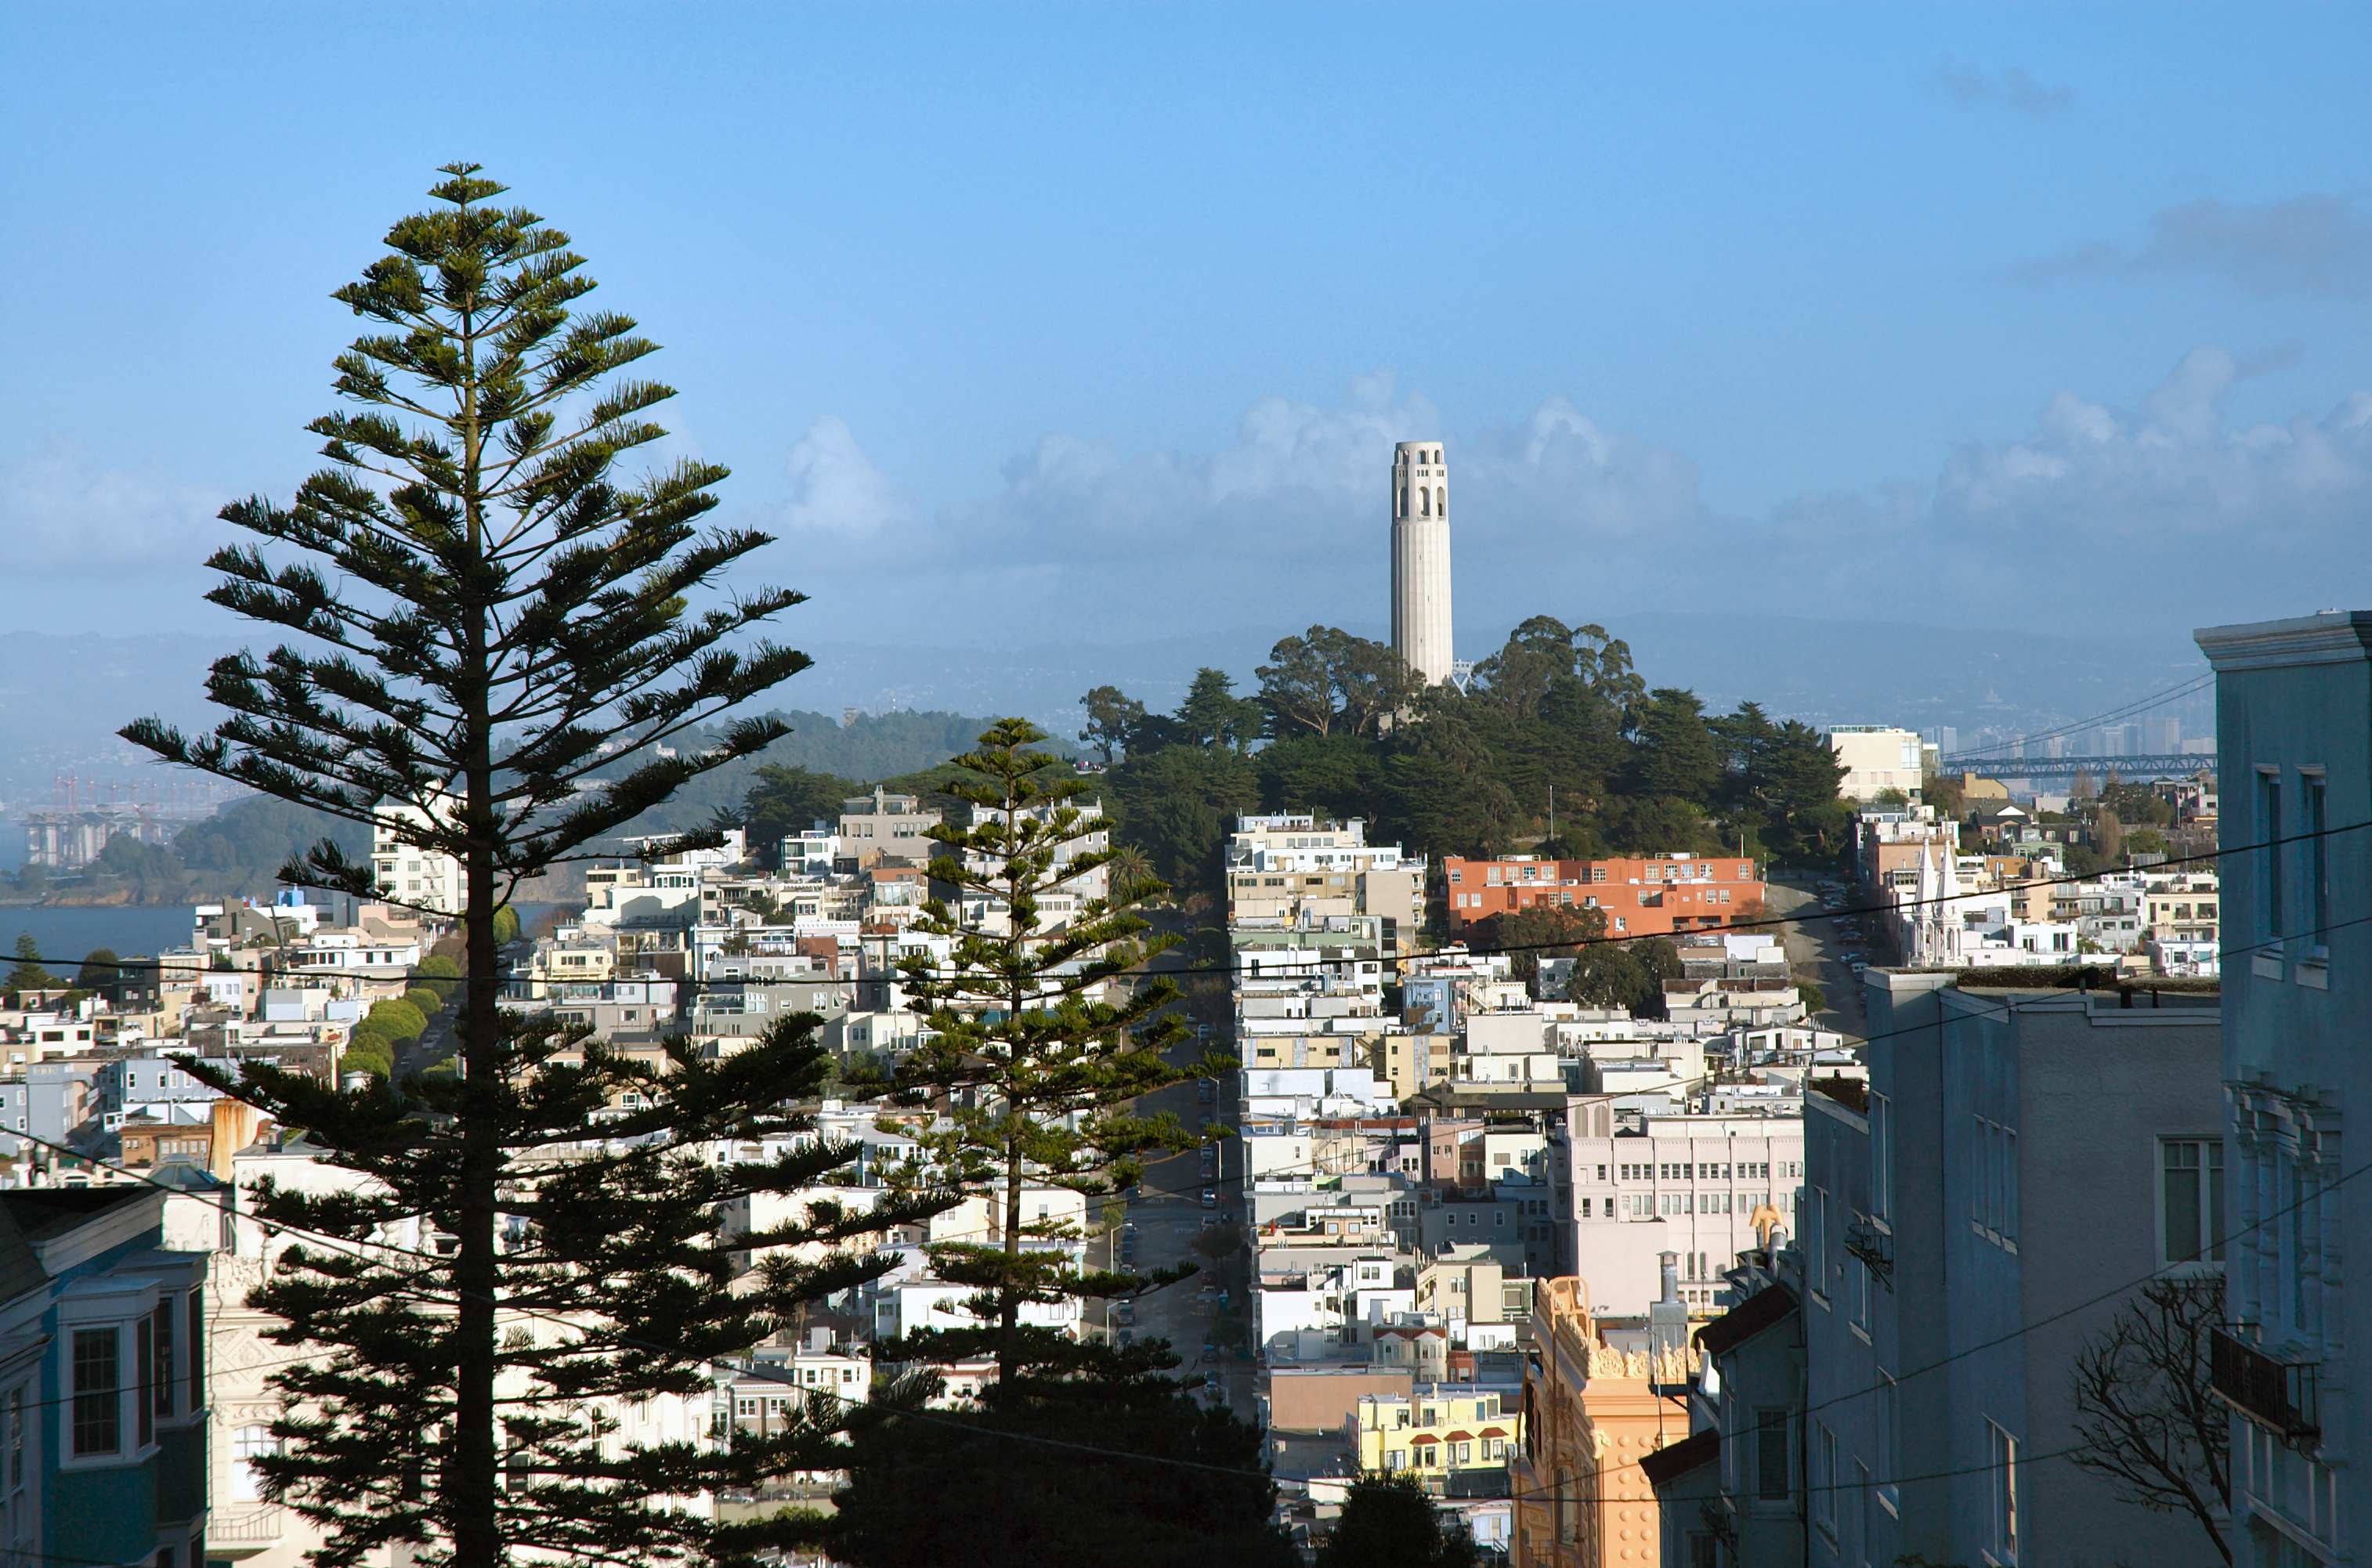 File:Coit Tower from Russian Hill.jpg - Wikimedia Commons